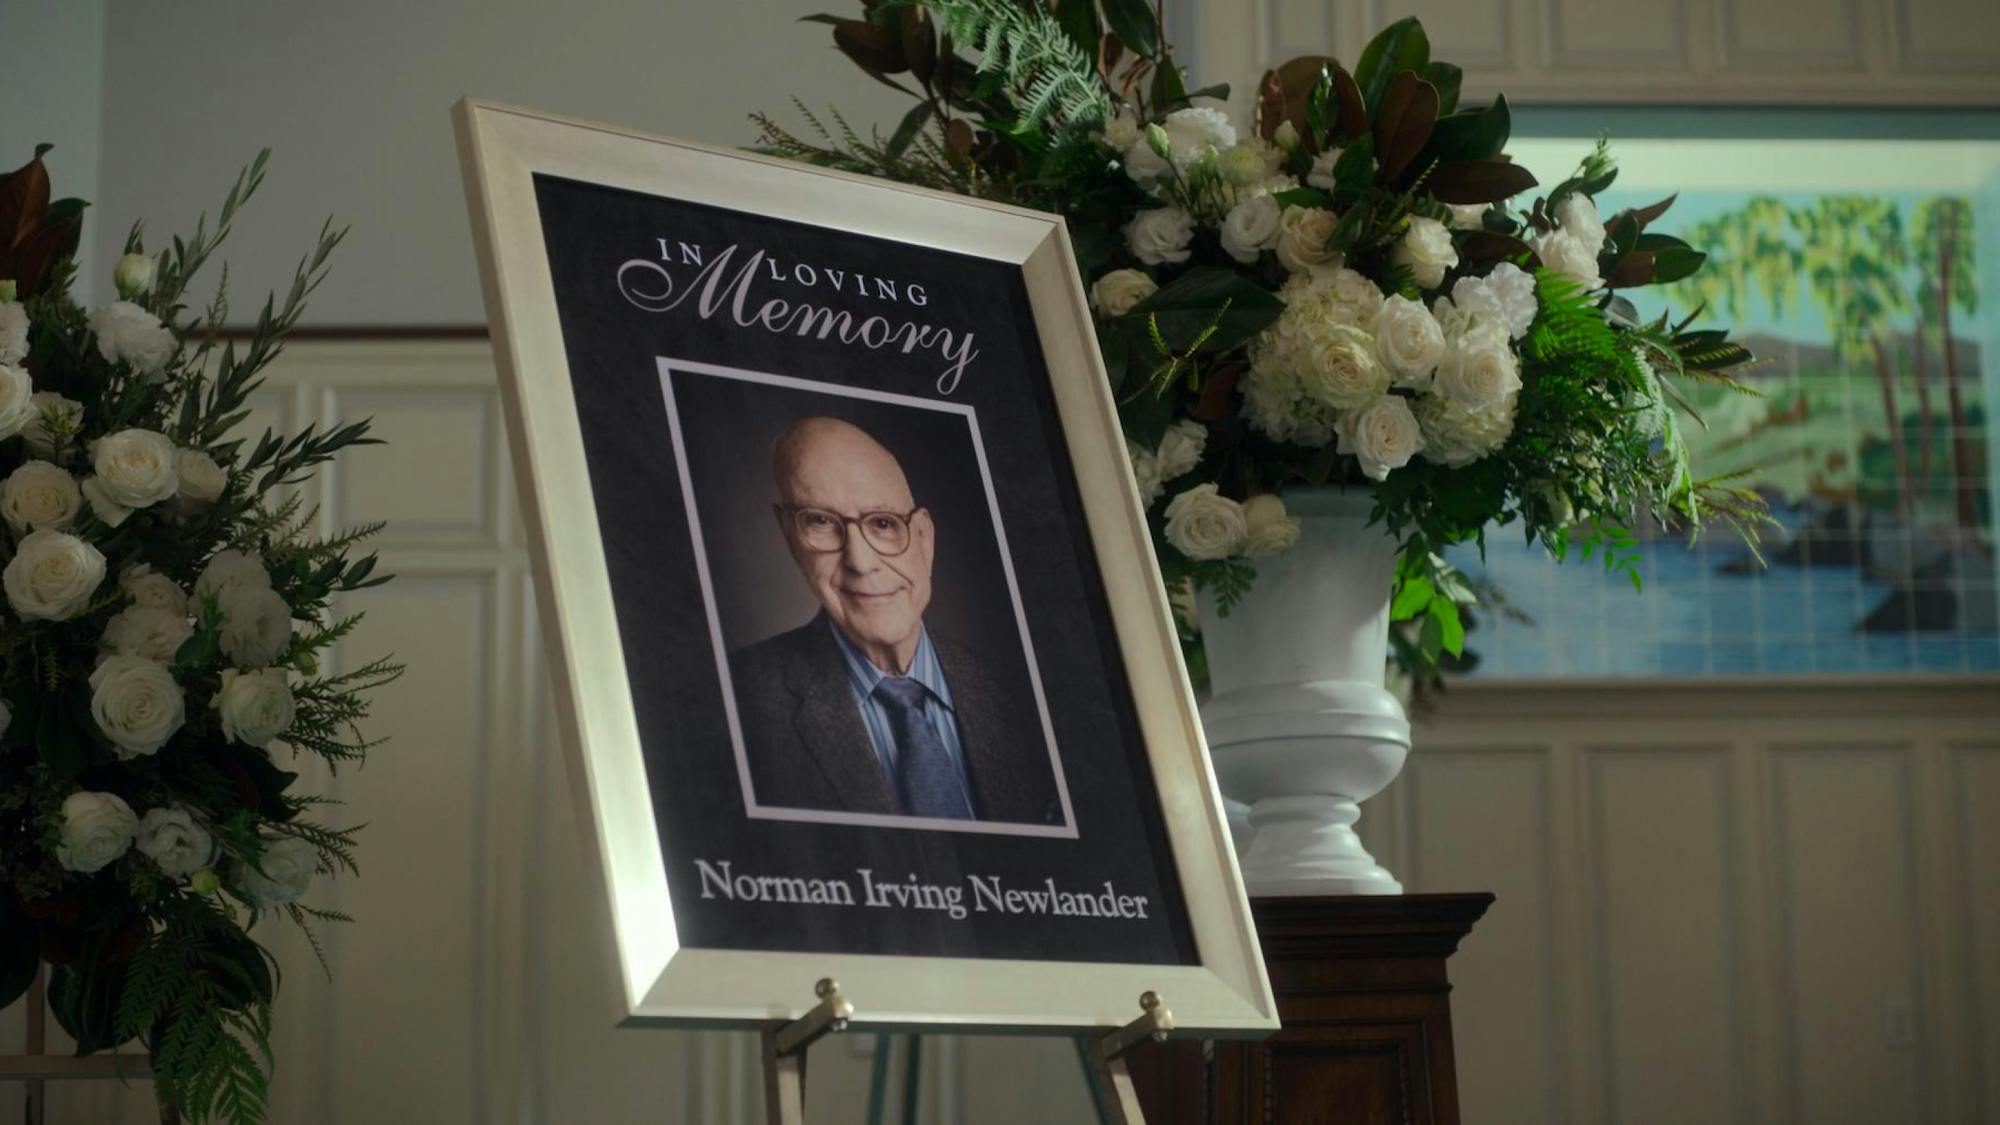 A portrait of Norman Newlander (Alan Arkin) sits propped up beside two vases of flowers. The scene appears to be a place of worship in which a funeral is taking place. The portrait is framed with gold and is predominately dark save the white lettering (“In Loving Memory of Norman Irving Newlander”). Newlander wears glasses, a blue shirt, navy tie, and navy blazer, and he smiles.